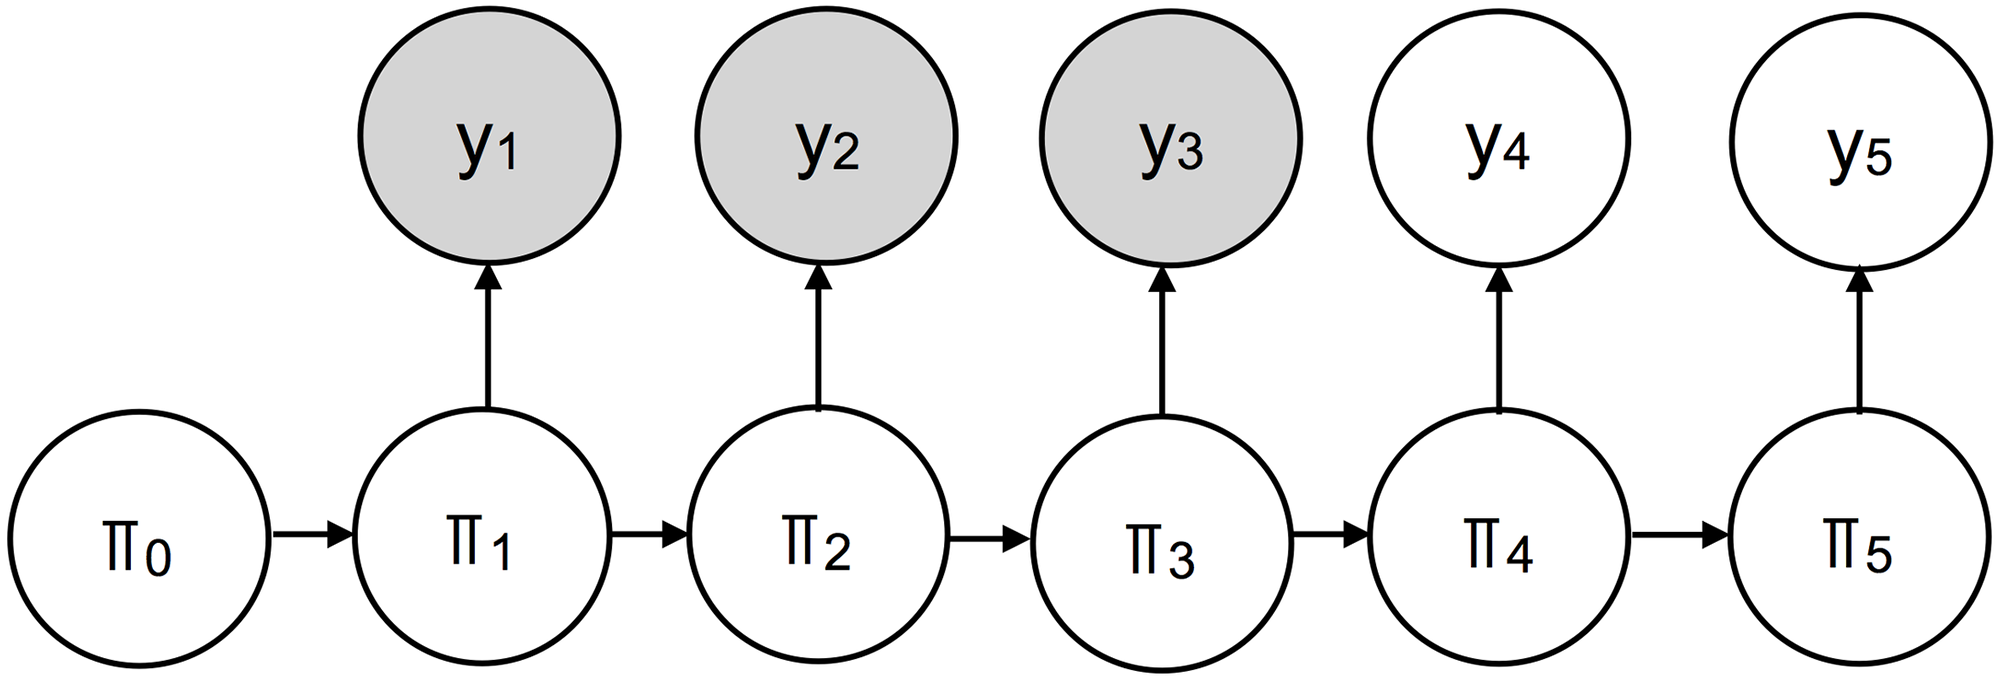 A simplified graphical representation of the Dynamic Bayesian Model (DBM). πt represents latent ILI nowcasting states, while yt represents available ILI nowcasting data. Shaded nodes represent observed quantities; unshaded nodes represent unobserved quantities. Directed edges represent dependencies between nodes.